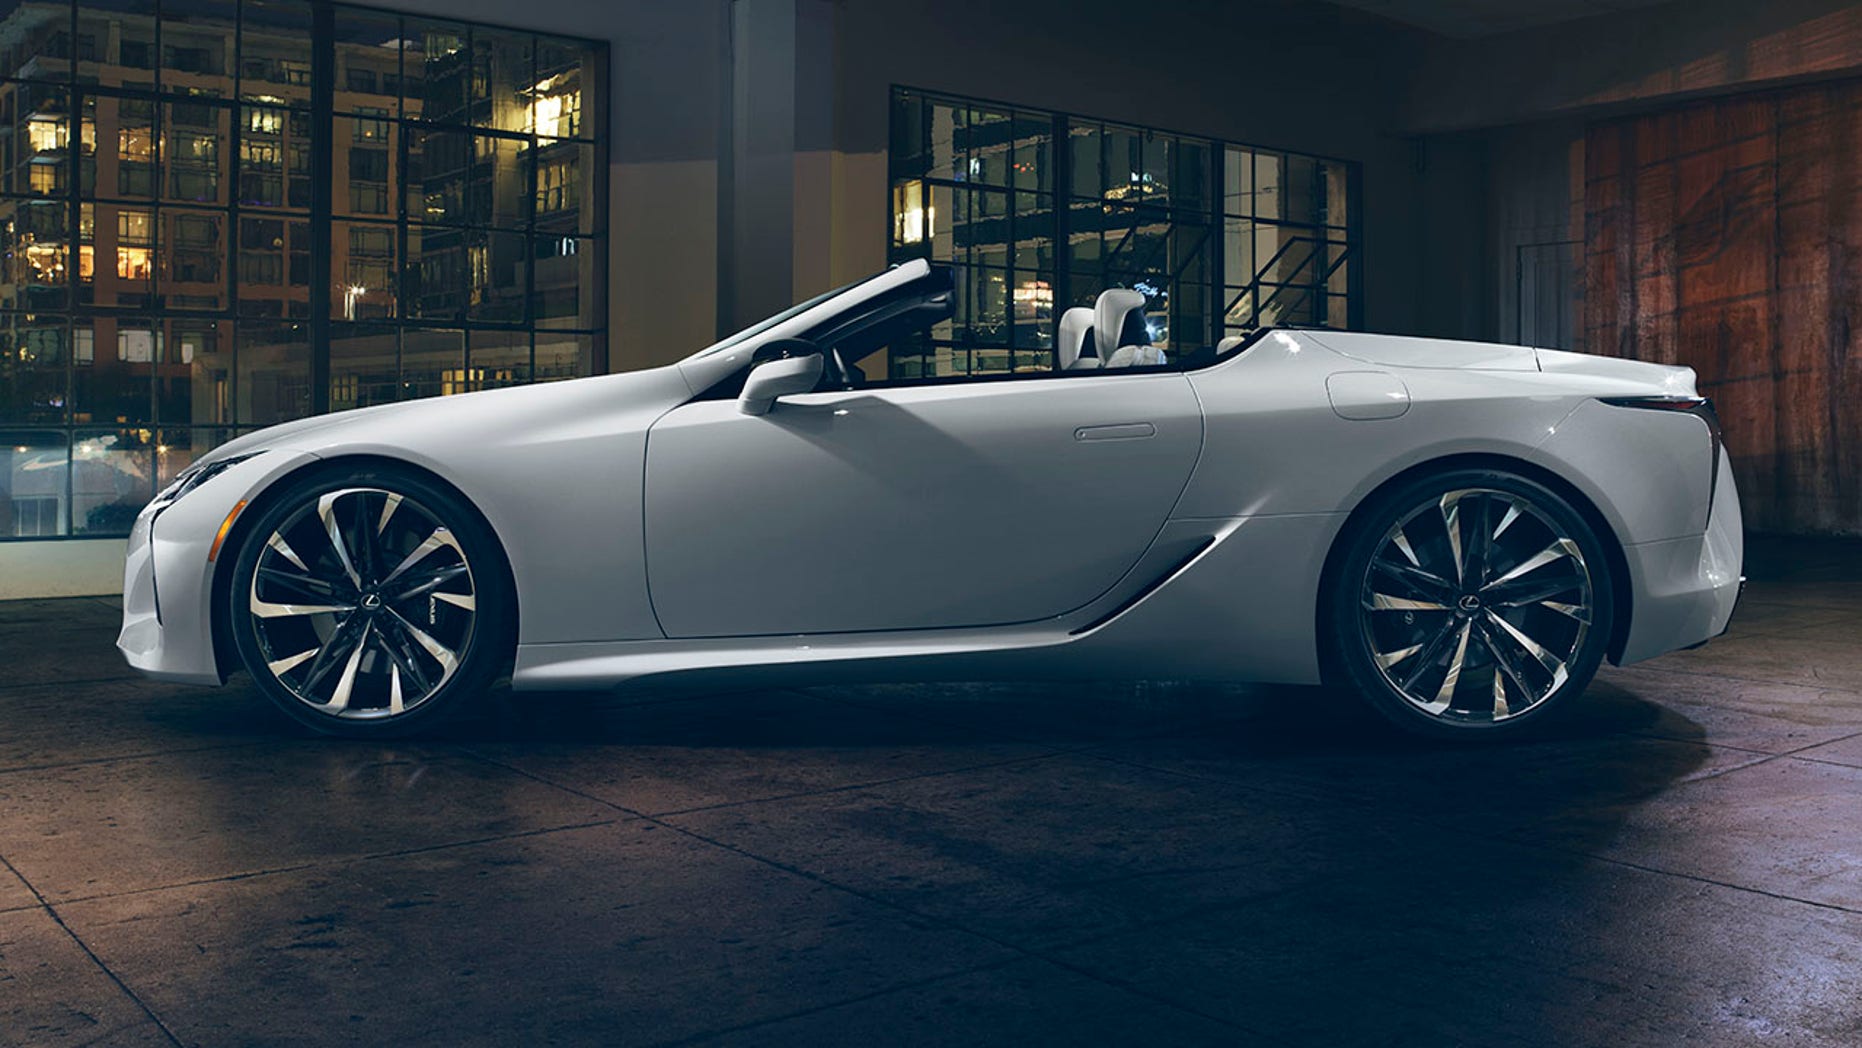 The Lexus LC Convertible Concept is a stunning way to get some sun